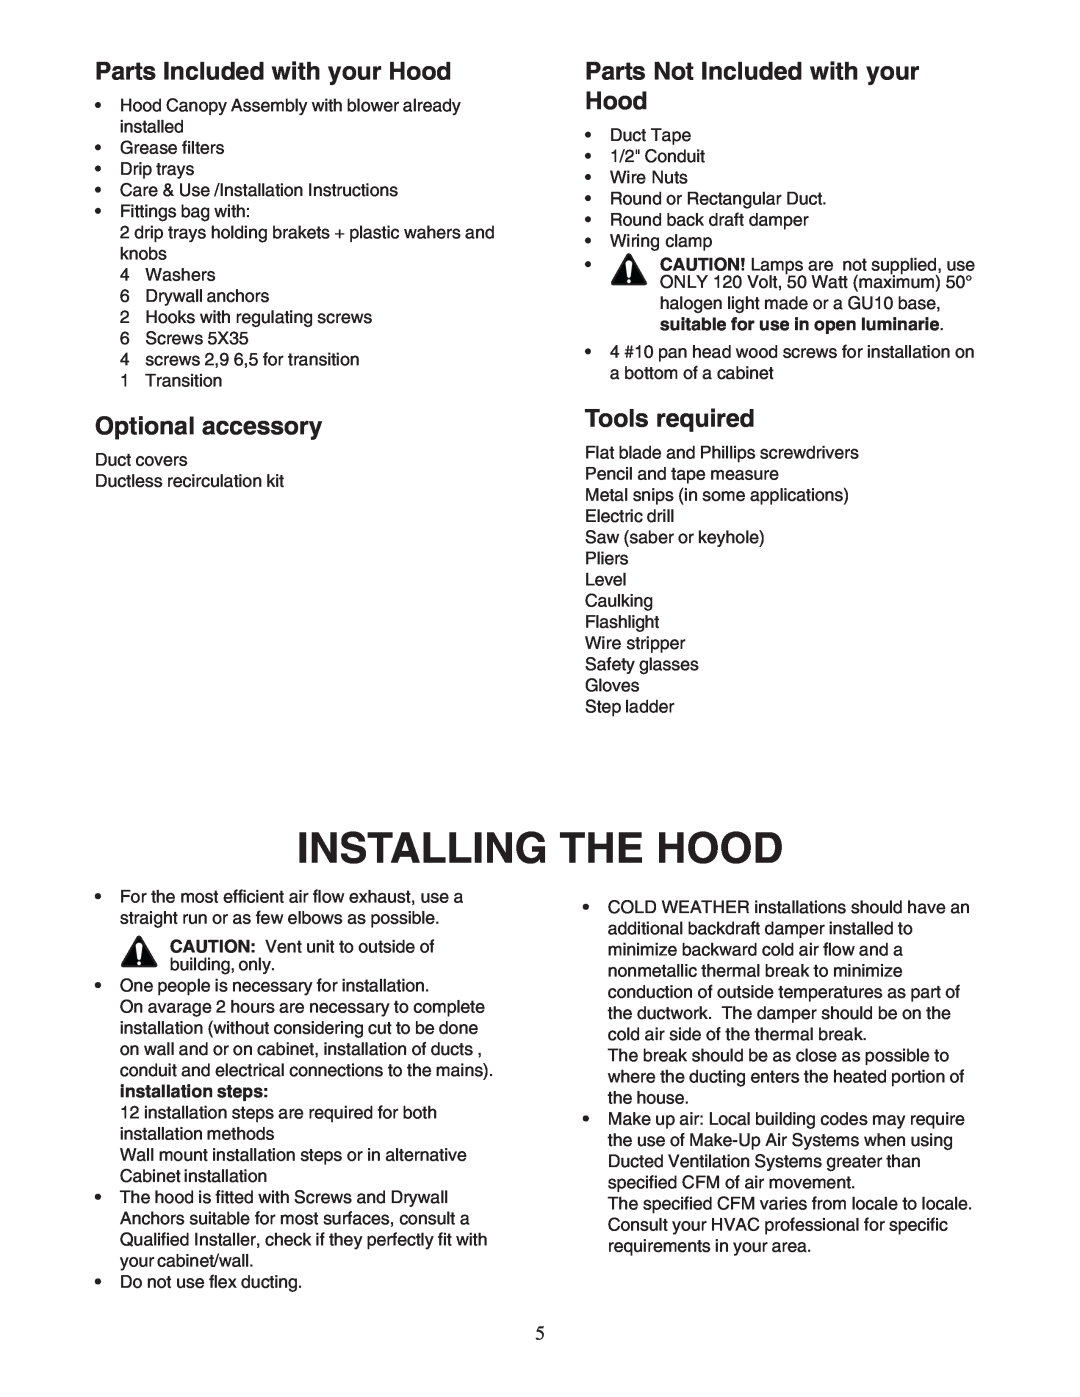 Thermador PHH36DS, PHH30DS manual Installing The Hood, Parts Included with your Hood, Optional accessory, Tools required 